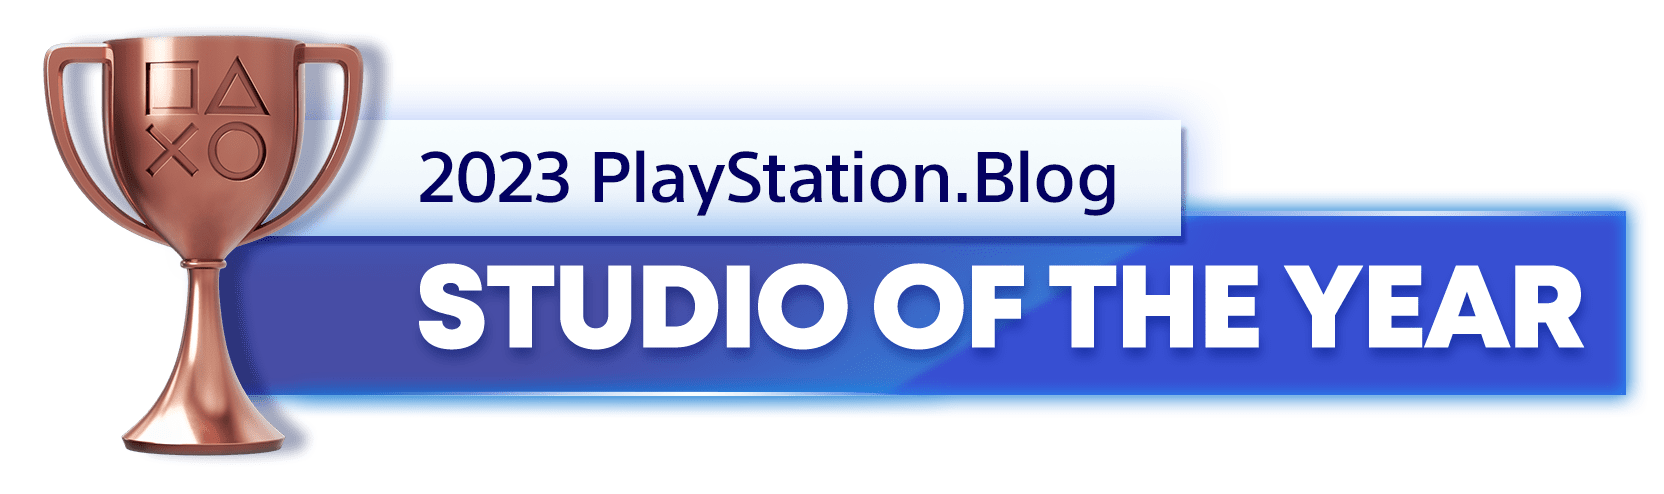 Bronze Trophy for the 2023 PlayStation Blog Studio of the Year Winner